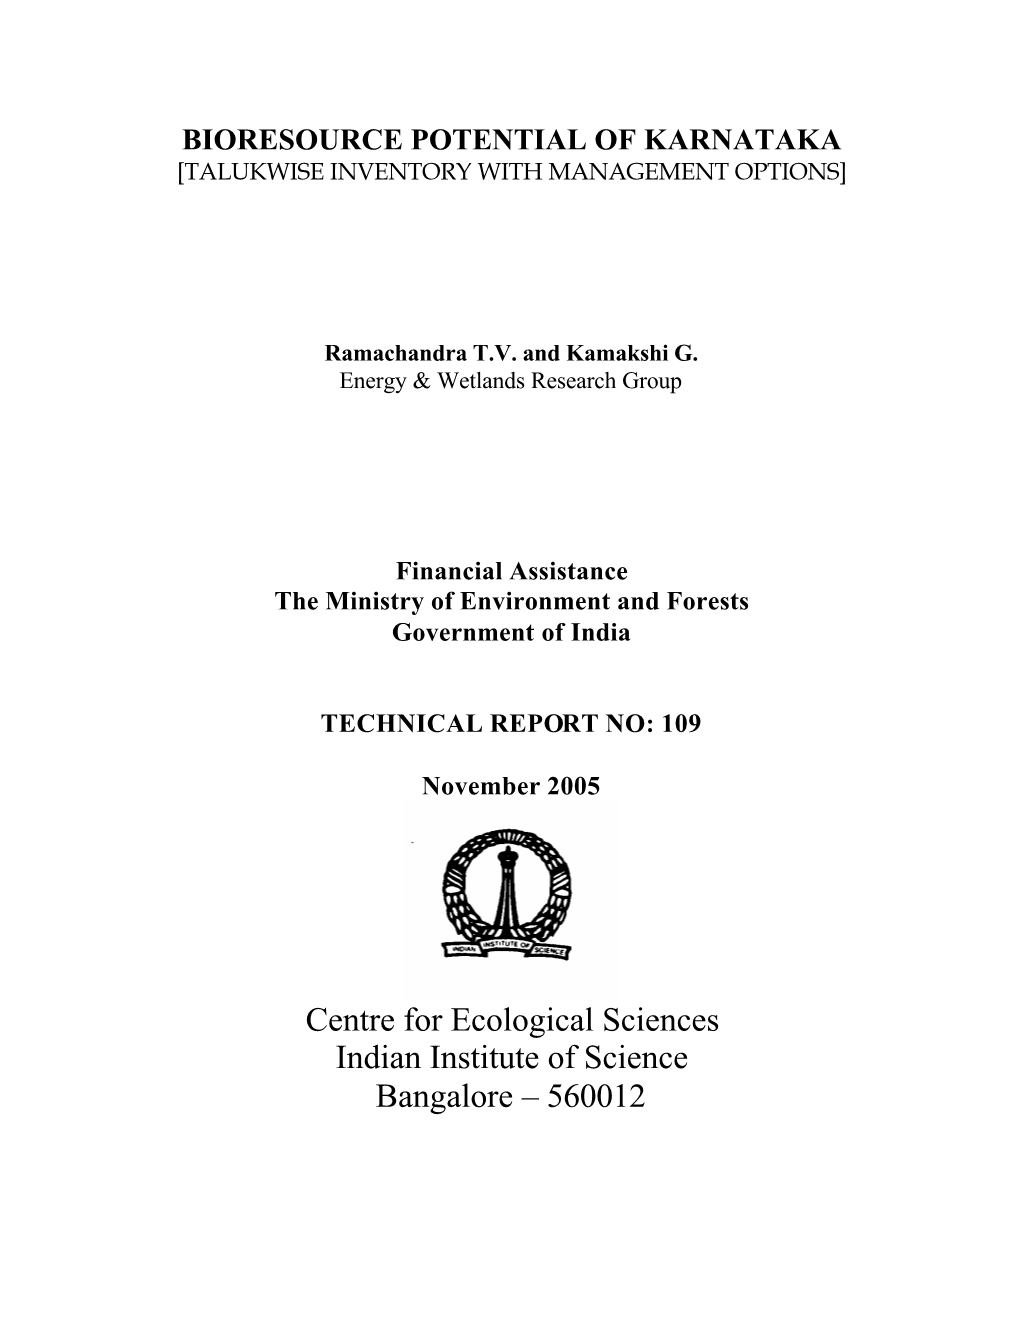 Centre for Ecological Sciences Indian Institute of Science Bangalore – 560012 Summary